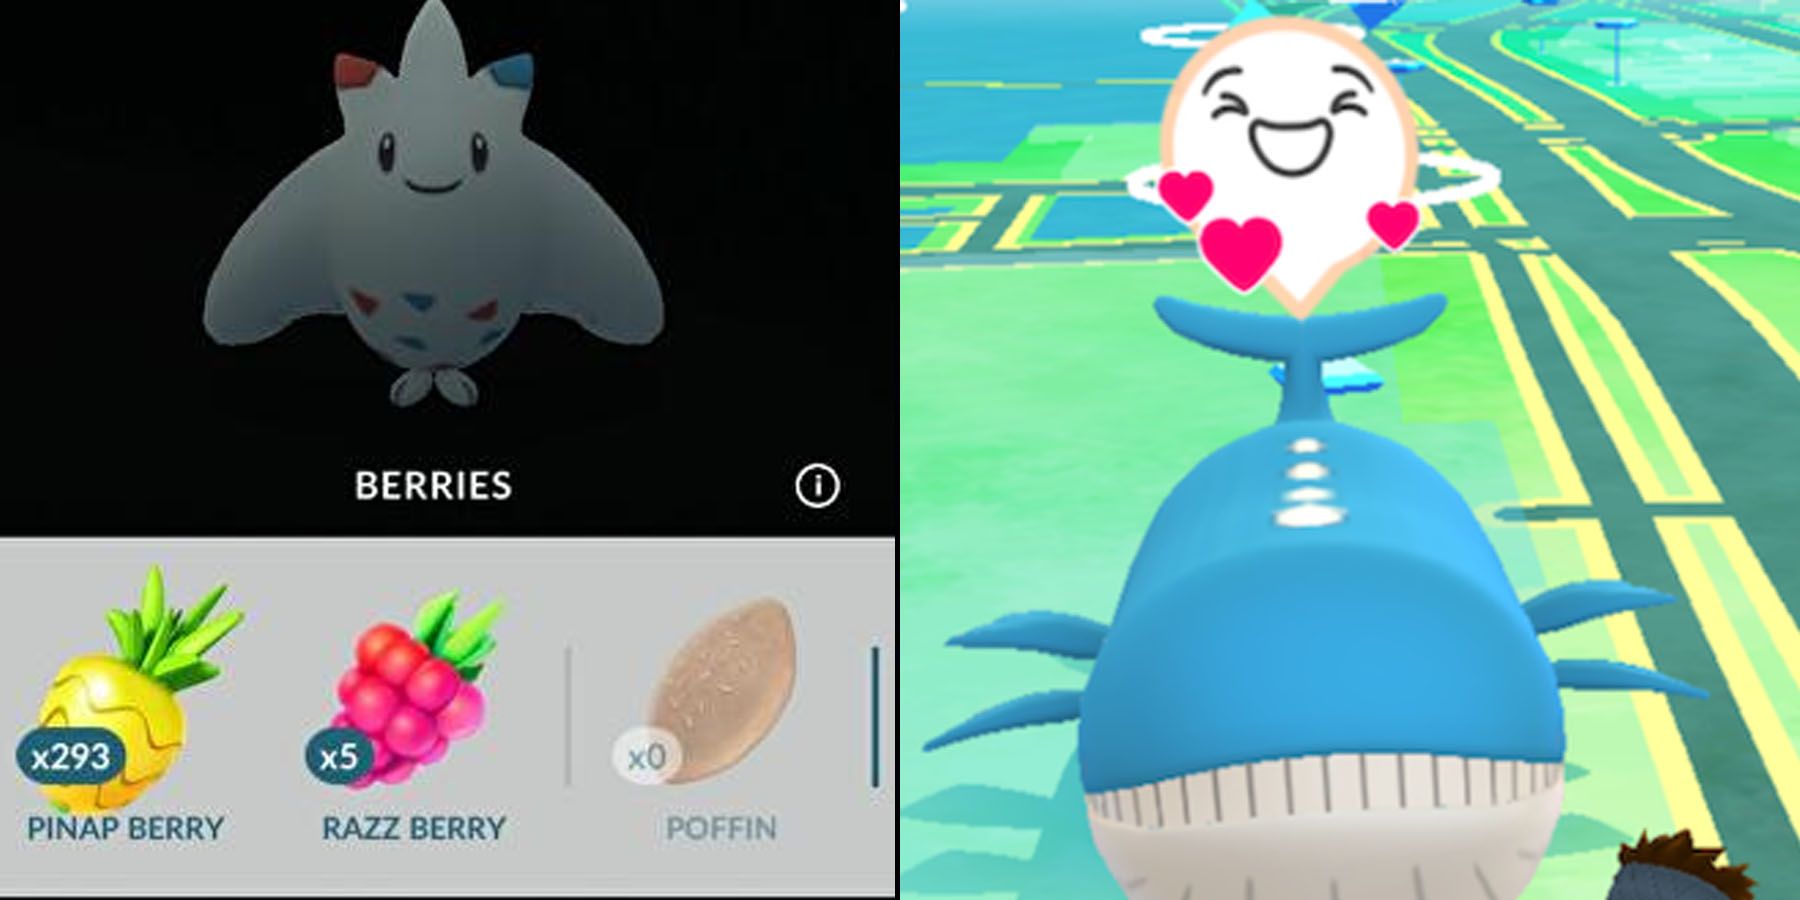 Getting Hearts with Buddies in Pokemon GO